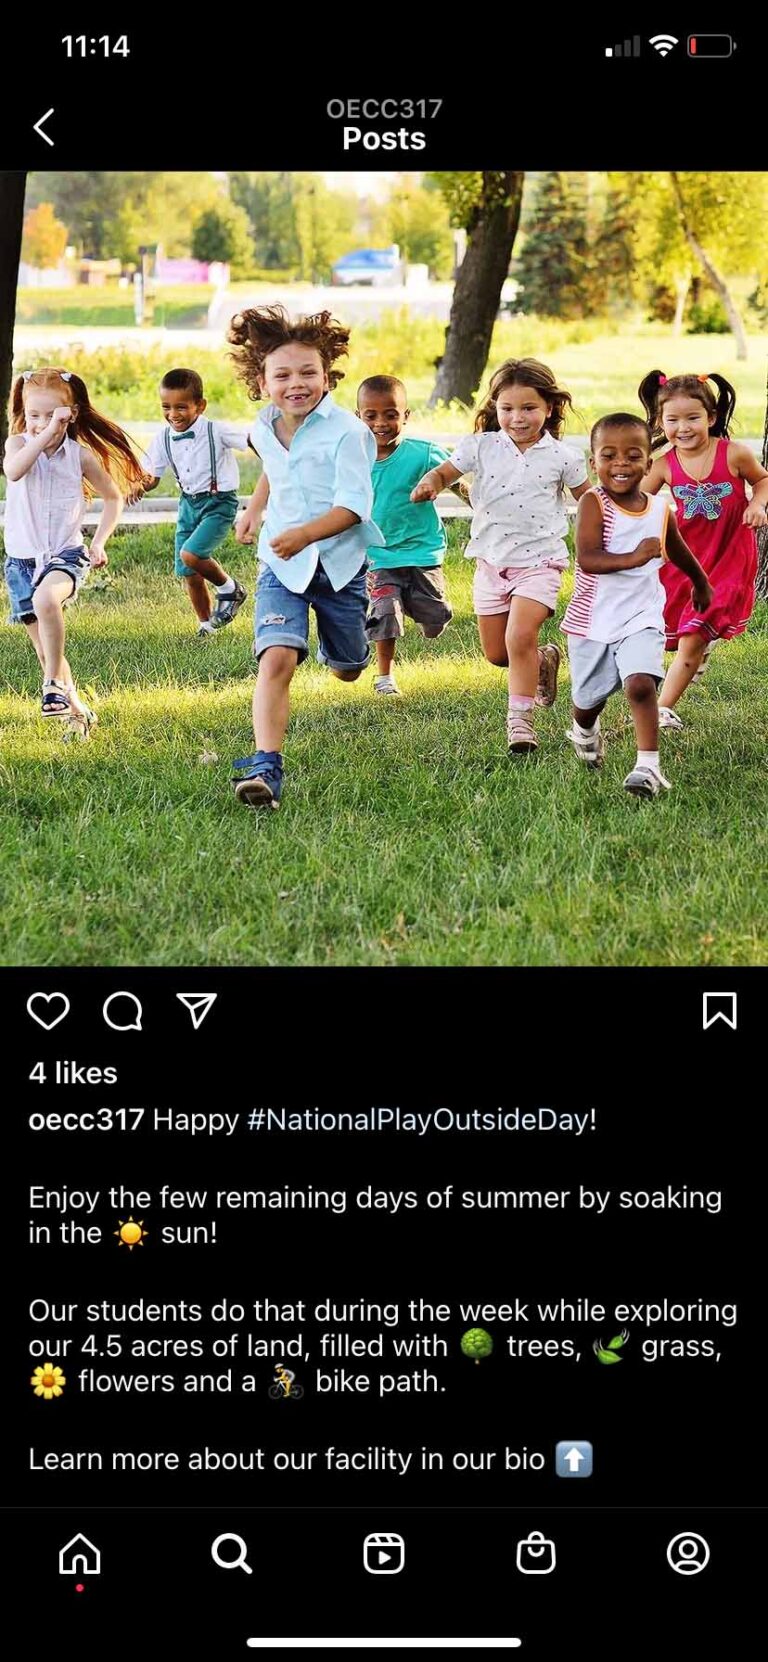 OECC instagram post screenshot for national play outside day